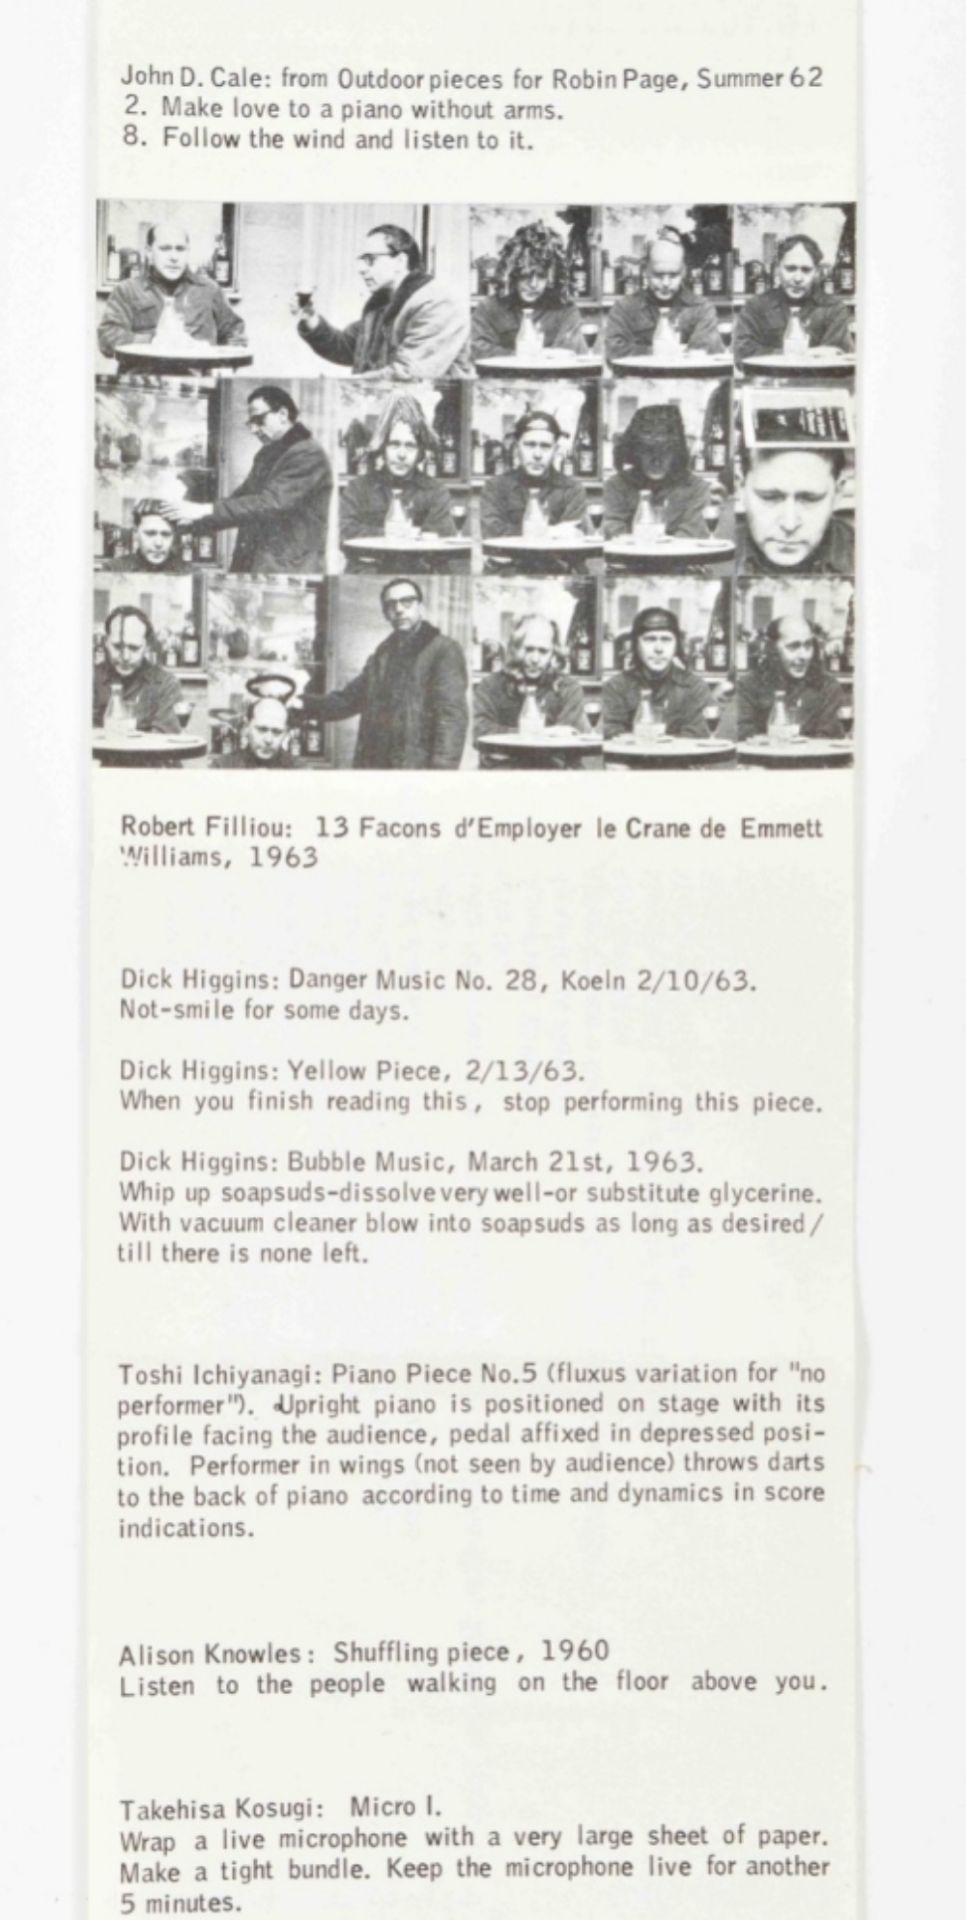 Fluxus Preview Review, 1963 - Image 4 of 7